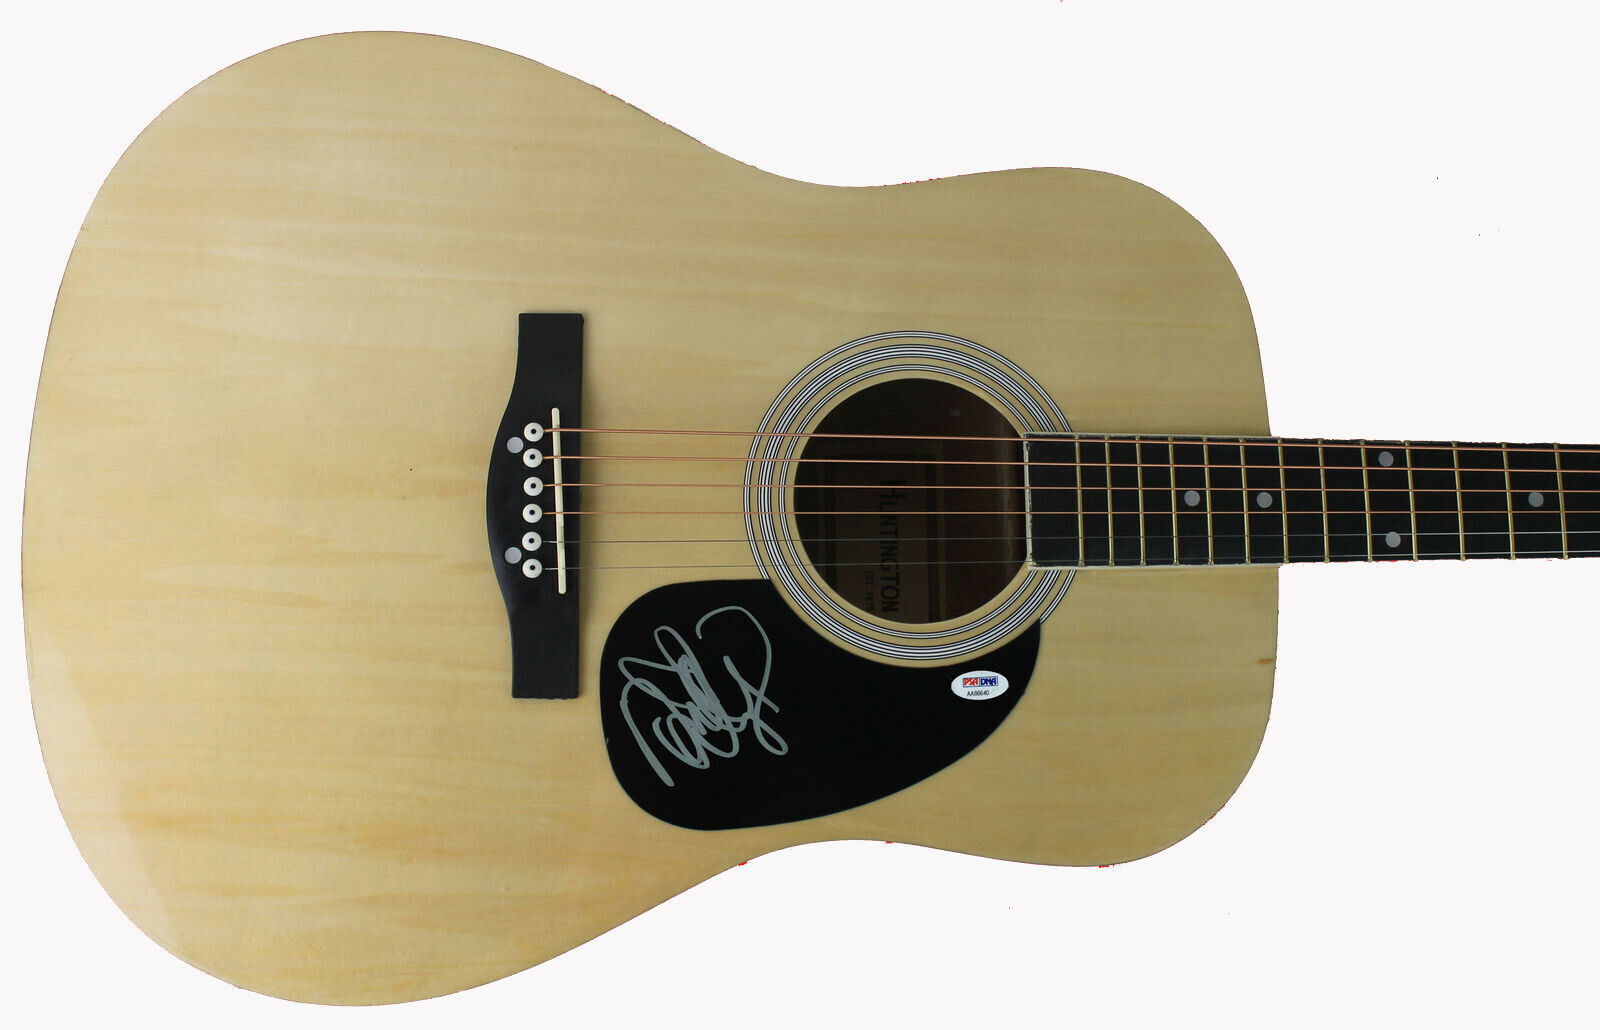 Danielle Bradbery The Voice Signed Acoustic Guitar Autographed PSA/DNA #AA86640